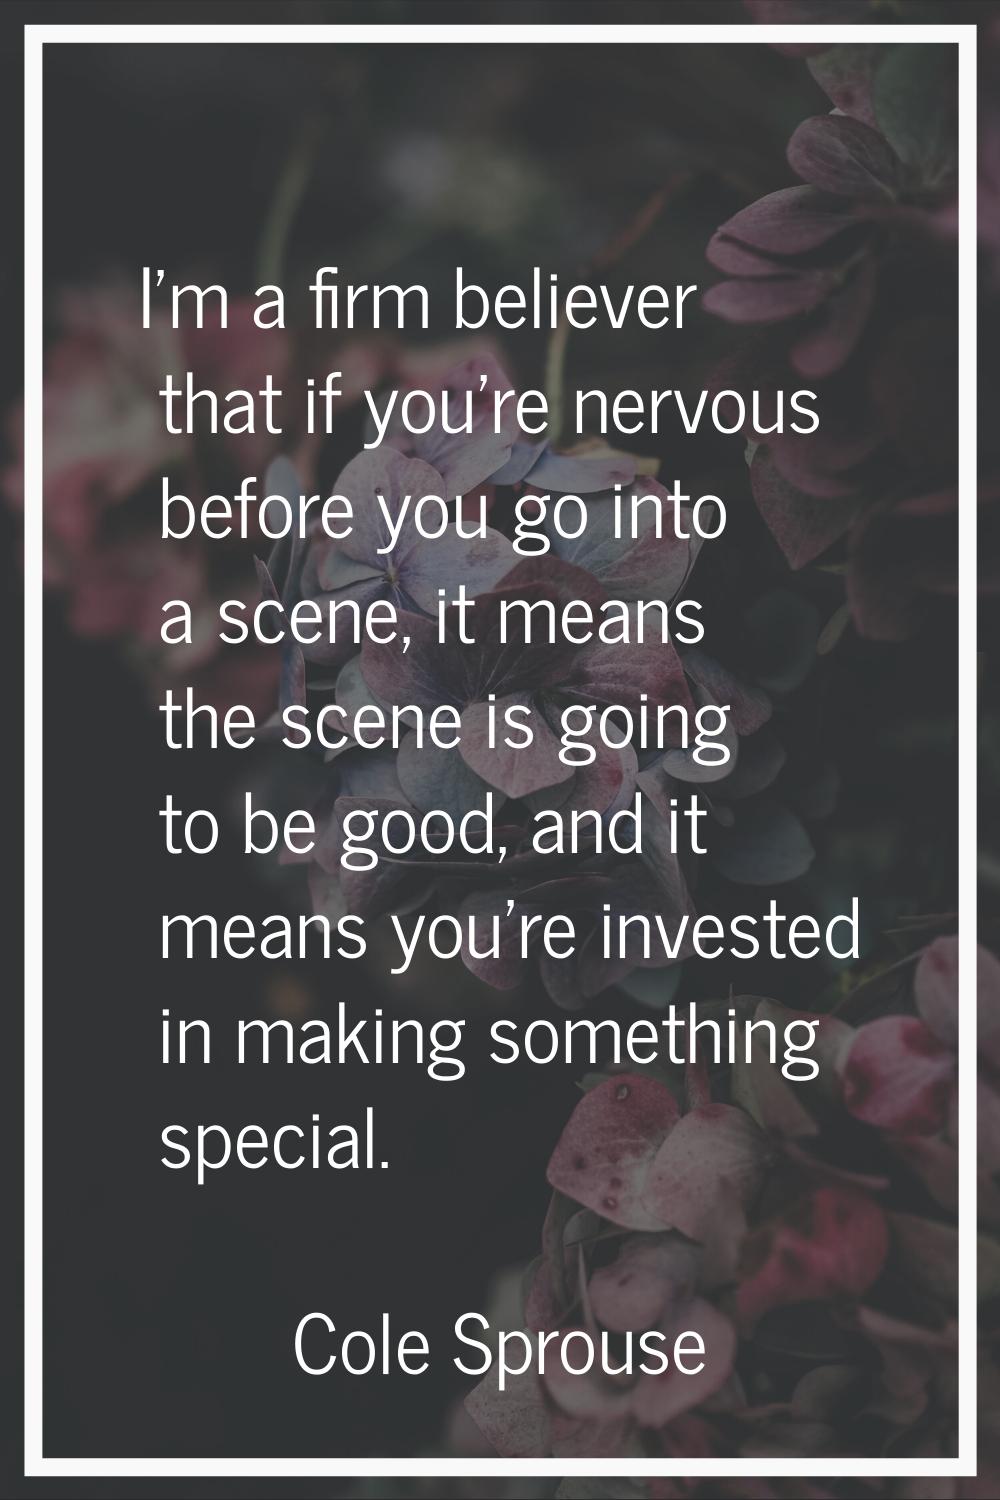 I'm a firm believer that if you're nervous before you go into a scene, it means the scene is going 